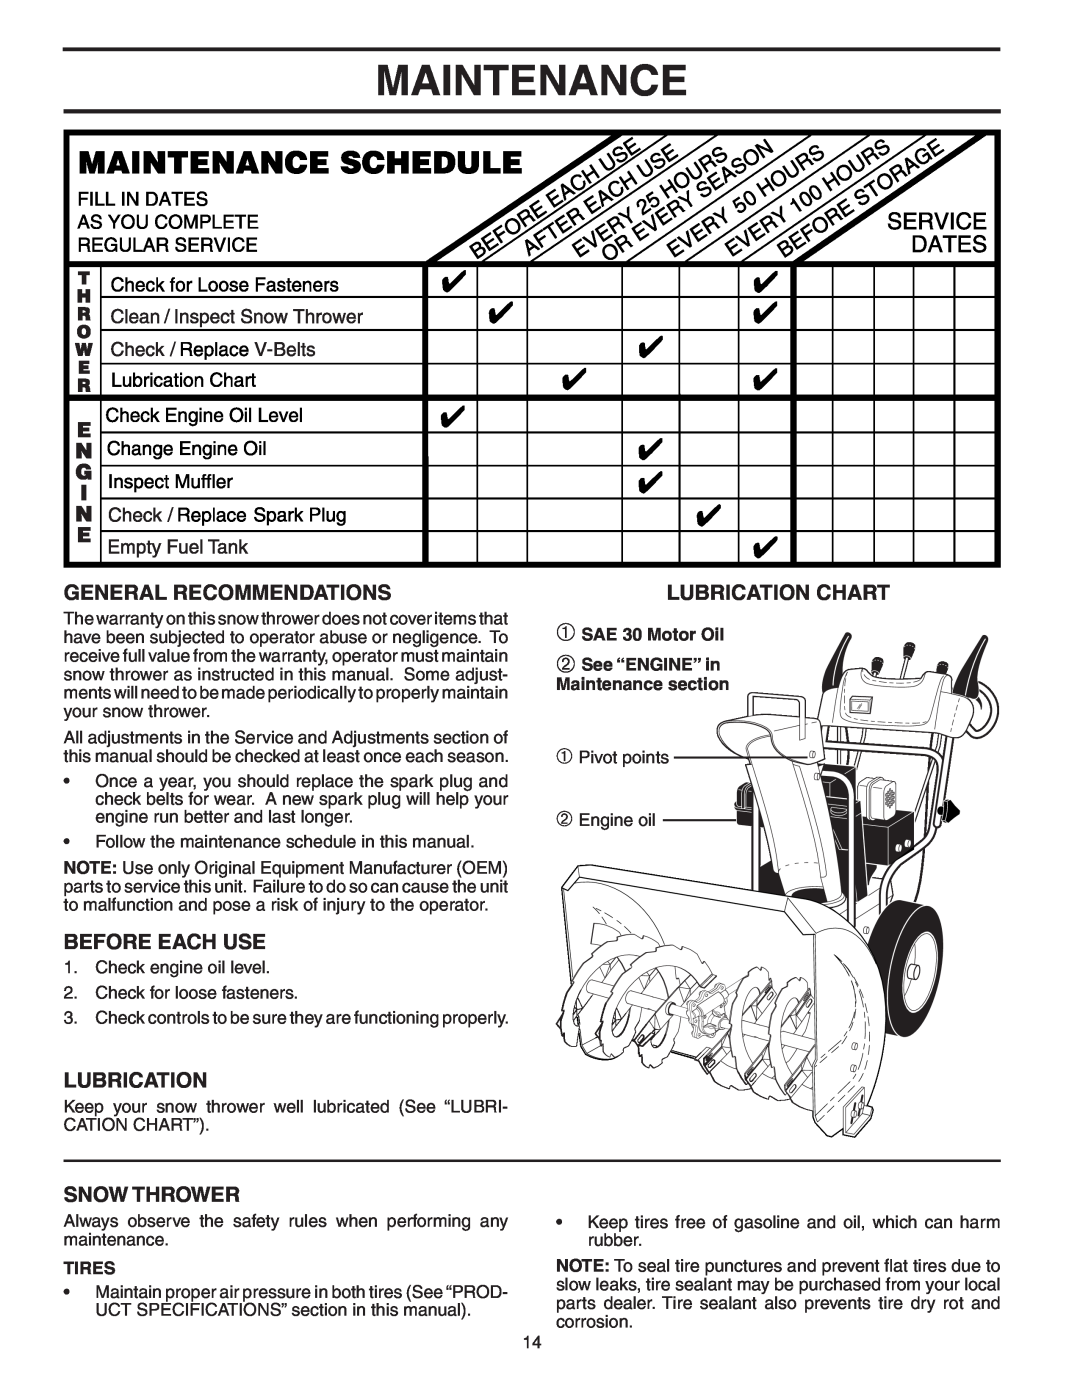 Husqvarna 9027ST Maintenance, General Recommendations, Before Each Use, Snow Thrower, Lubrication Chart, Tires 